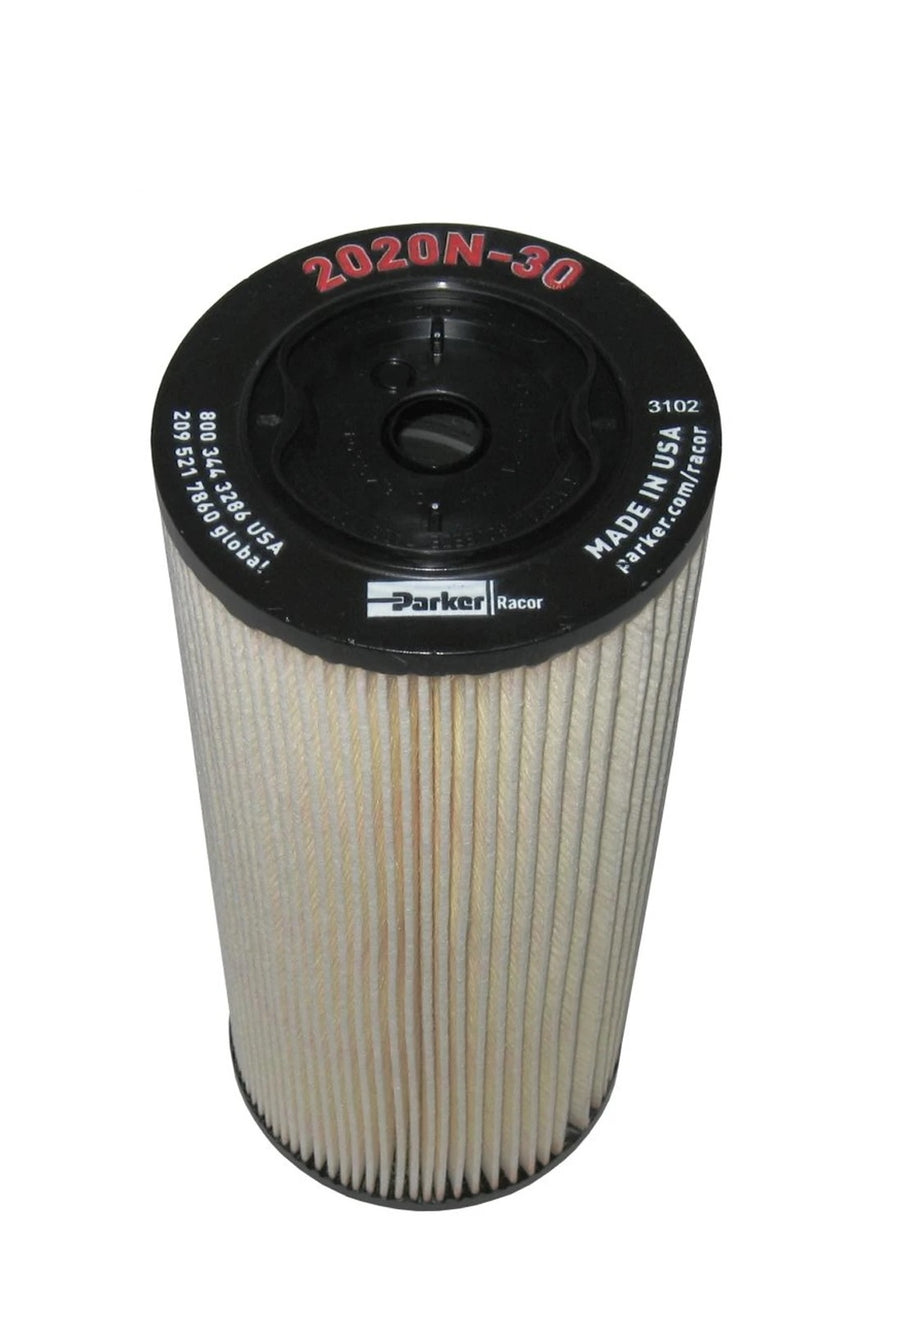 2020N-30 Racor Fuel Filter Element 30 Microns (Pack of 4), Cross Reference Donaldson P552024, Fleetguard FS20203